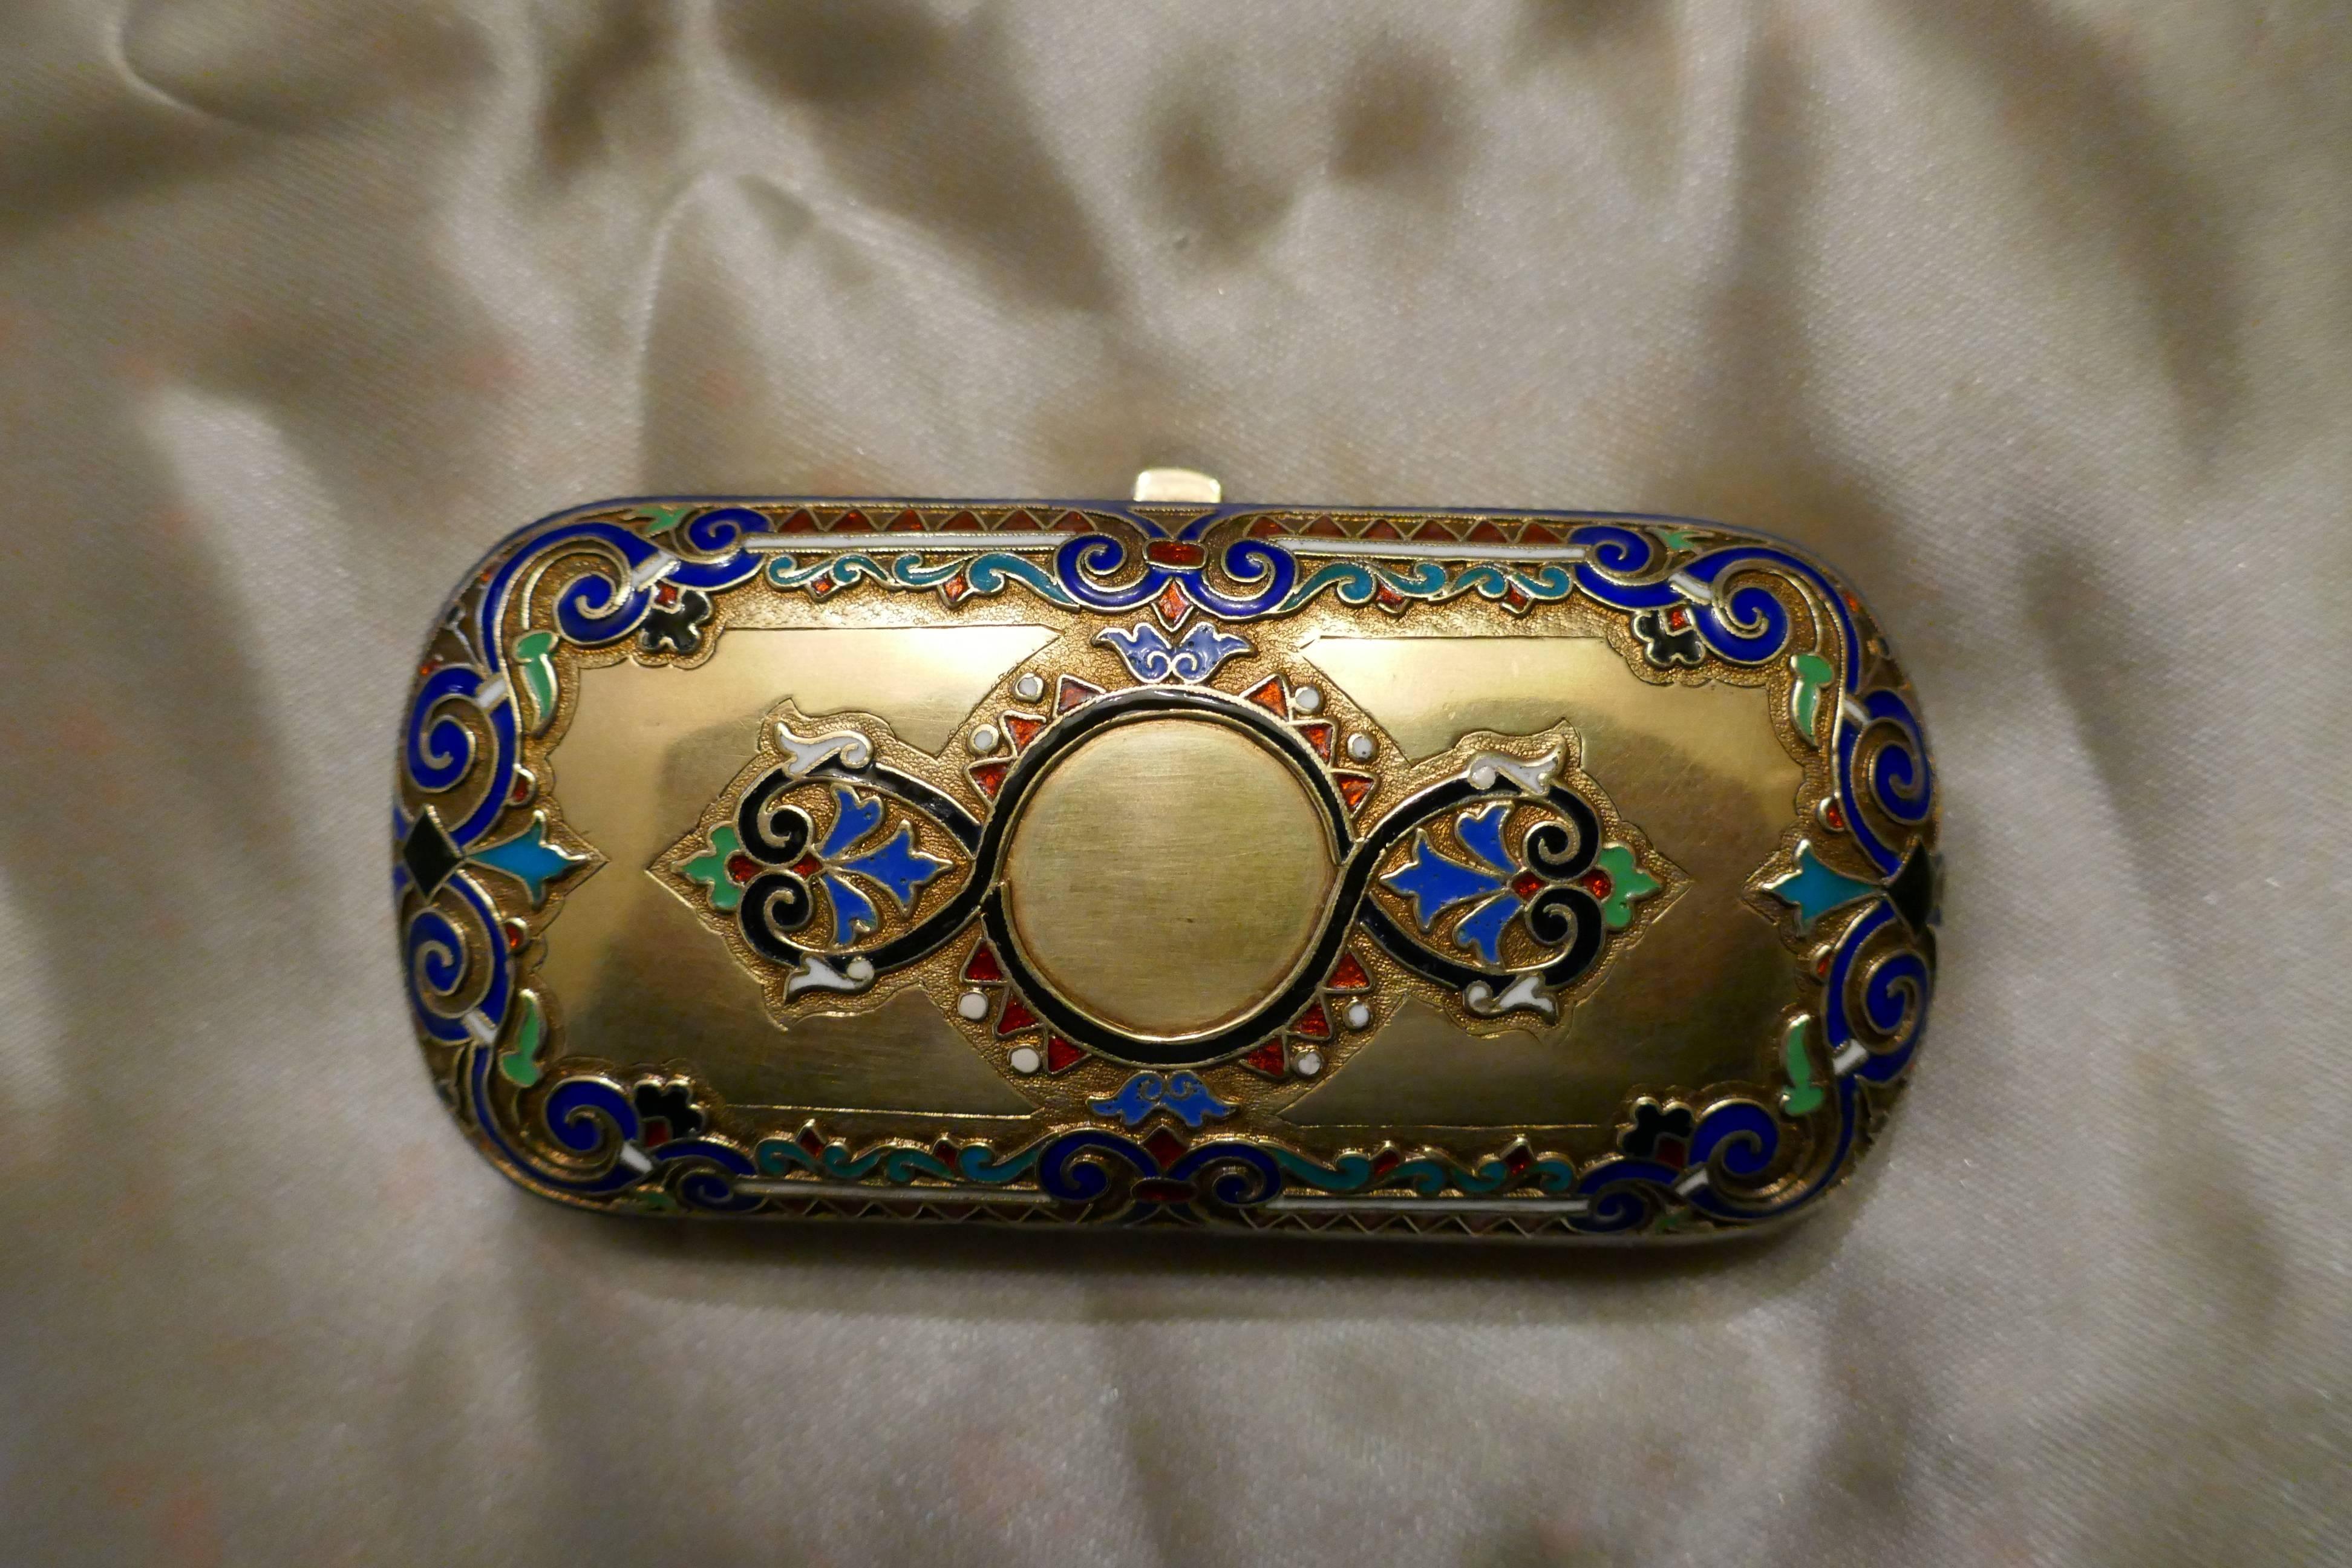 Early 20th century Russian silver gilt cloisonné case

This beautiful piece is lavishly decorated, but with a different design on each side.
One side has a centre plain roundel, ideal if you wanted to engrave on the case, the other side is more